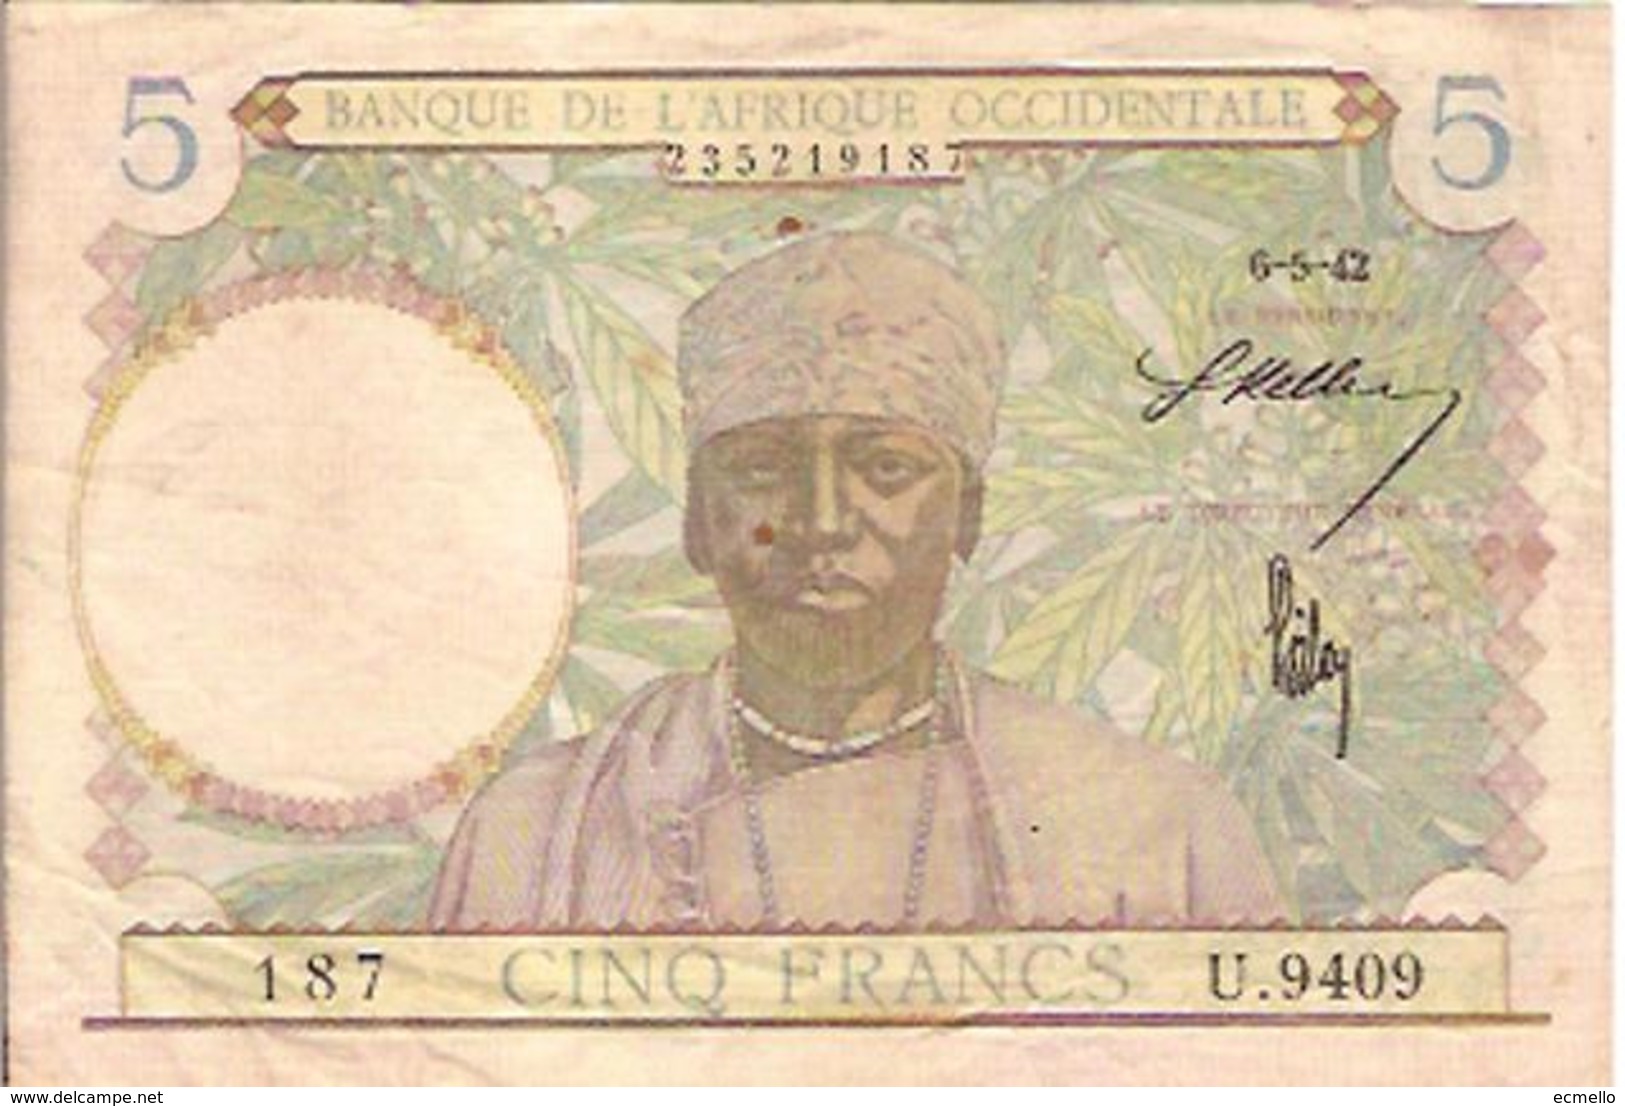 FRENCH WEST AFRICA P25 5 FRANCS 1942 FINE - Other - Africa